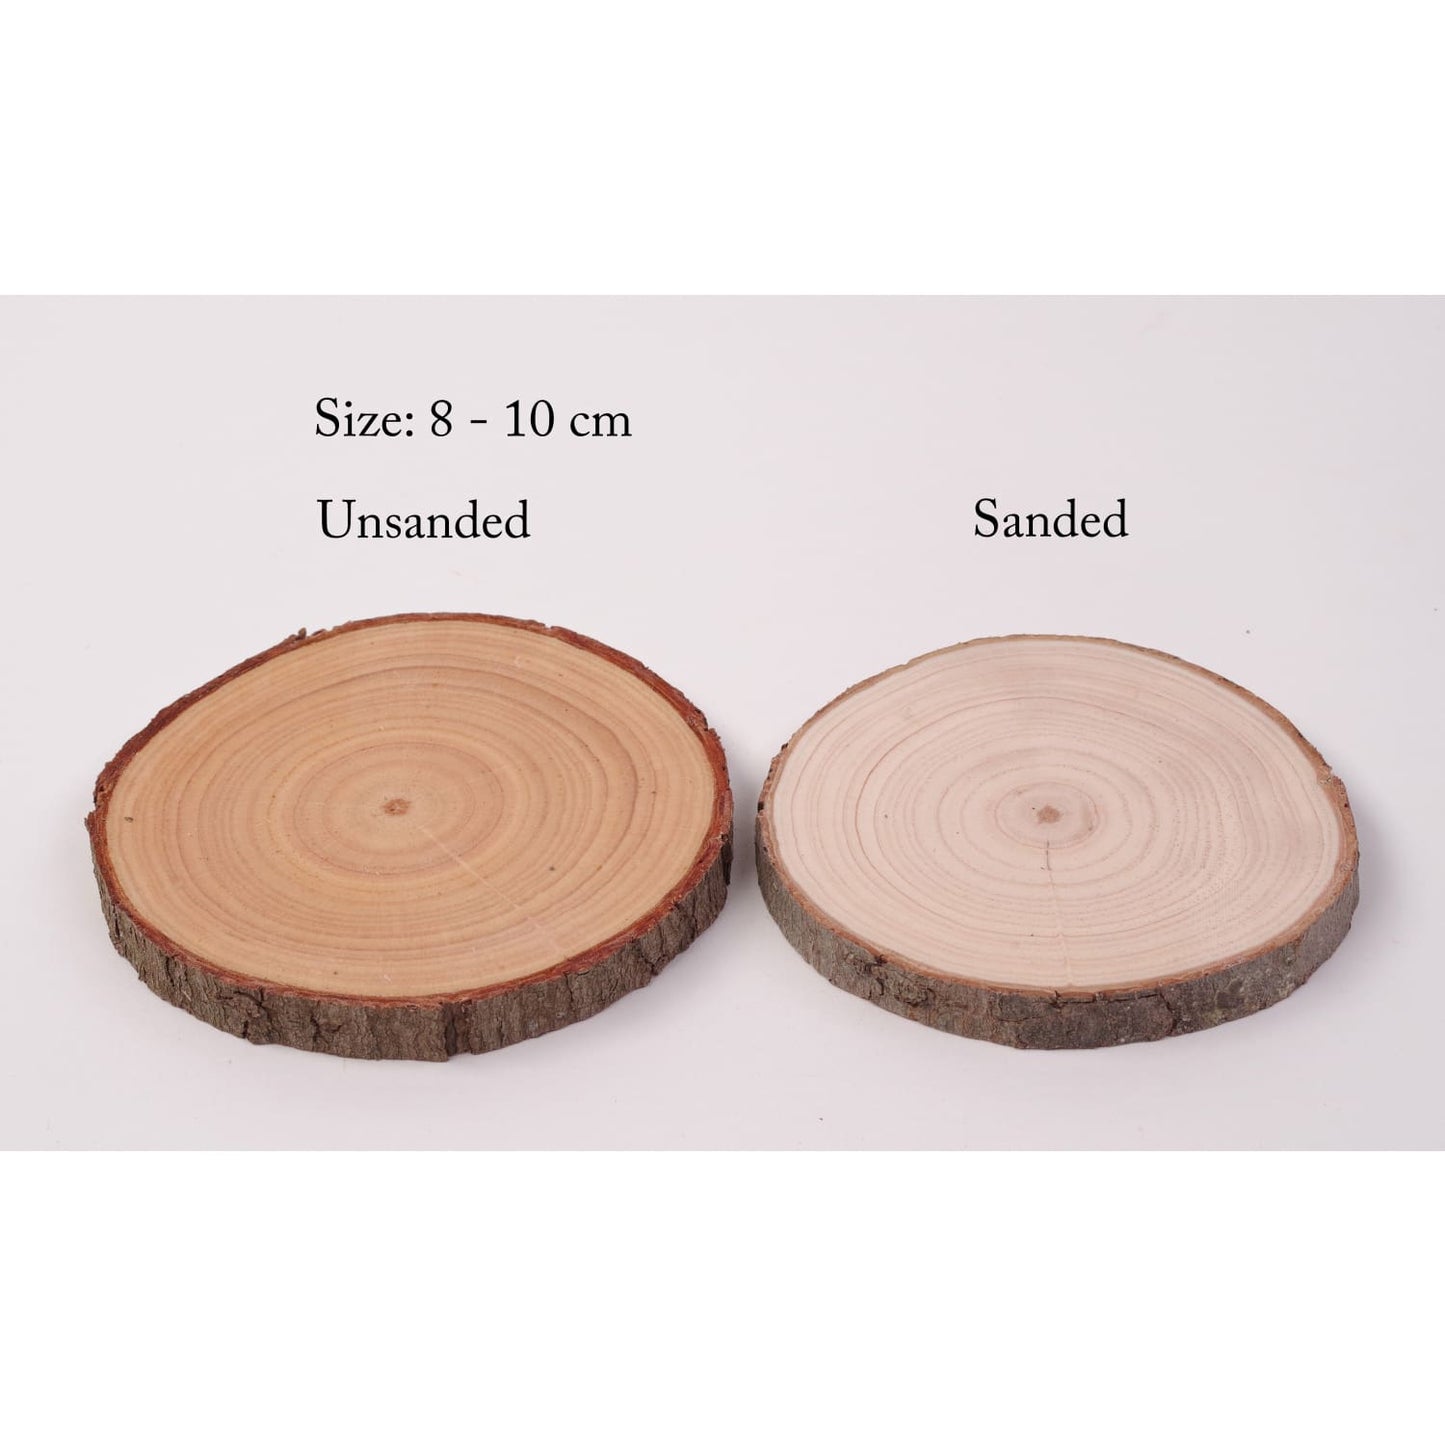 8 - 10 Cm Wood Slices (10 Pack) - Small Wood Slices